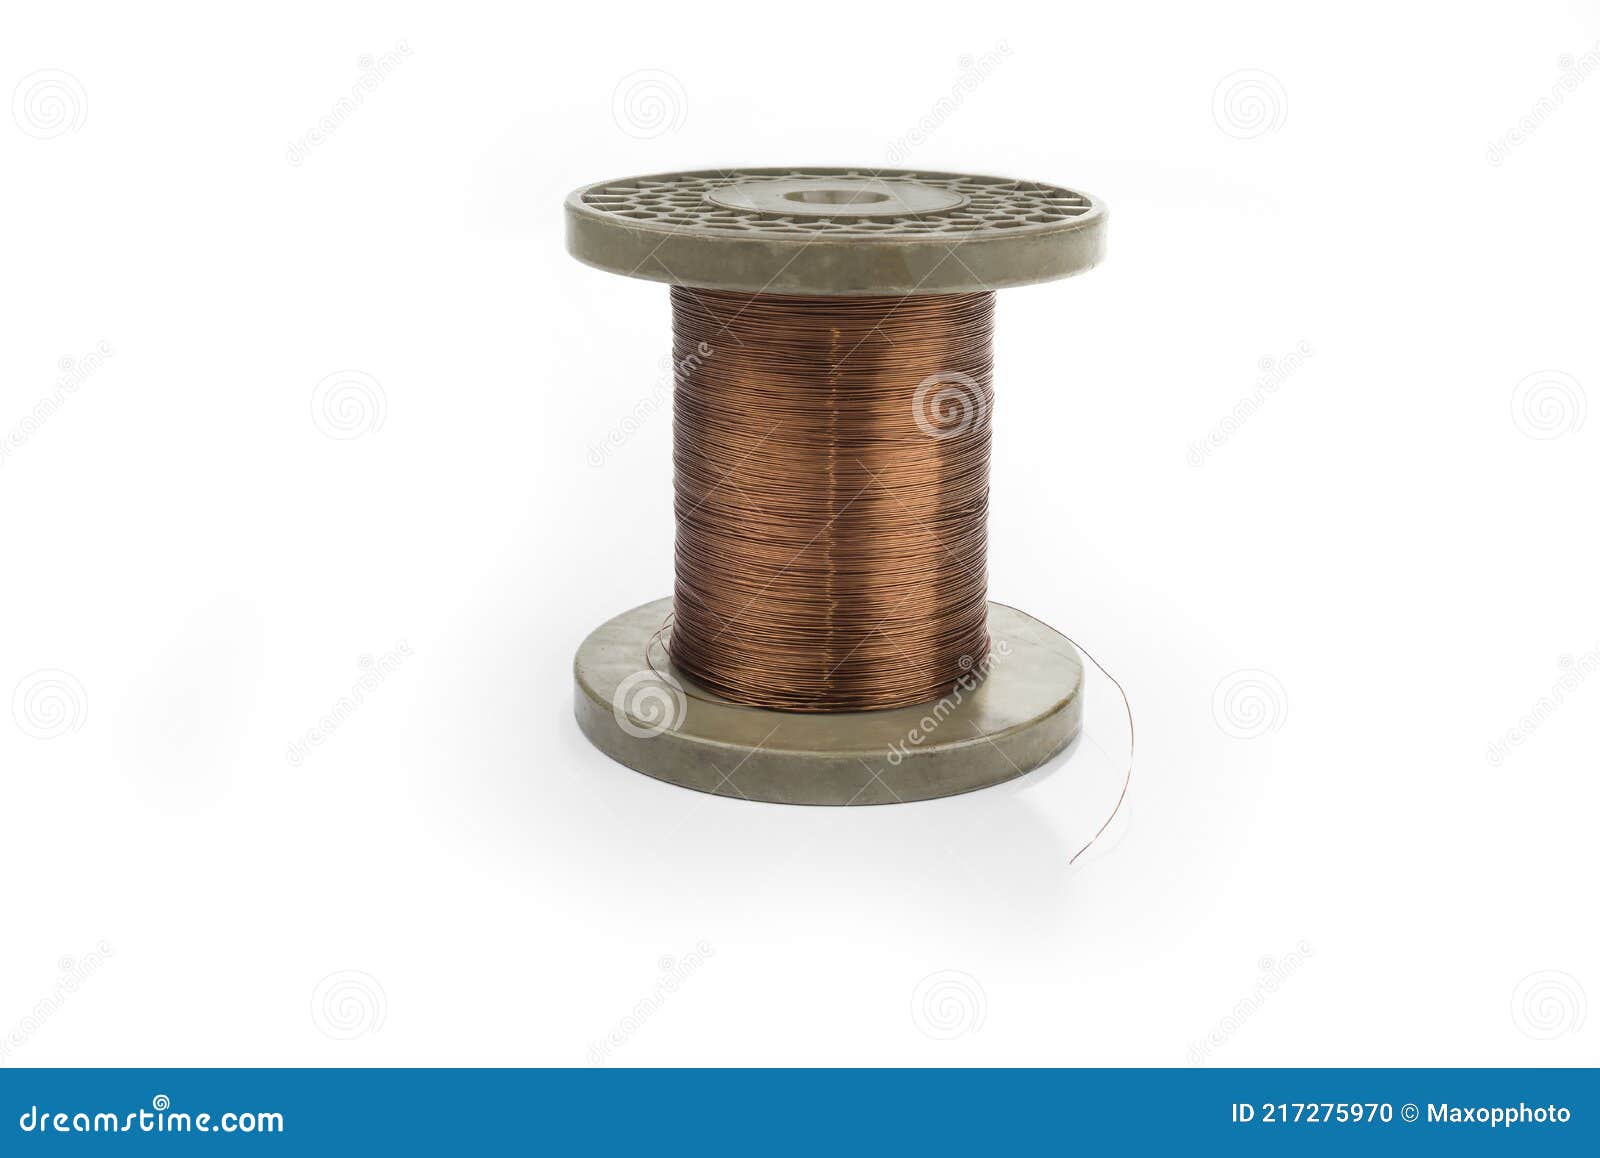 https://thumbs.dreamstime.com/z/copper-wire-reel-white-background-217275970.jpg